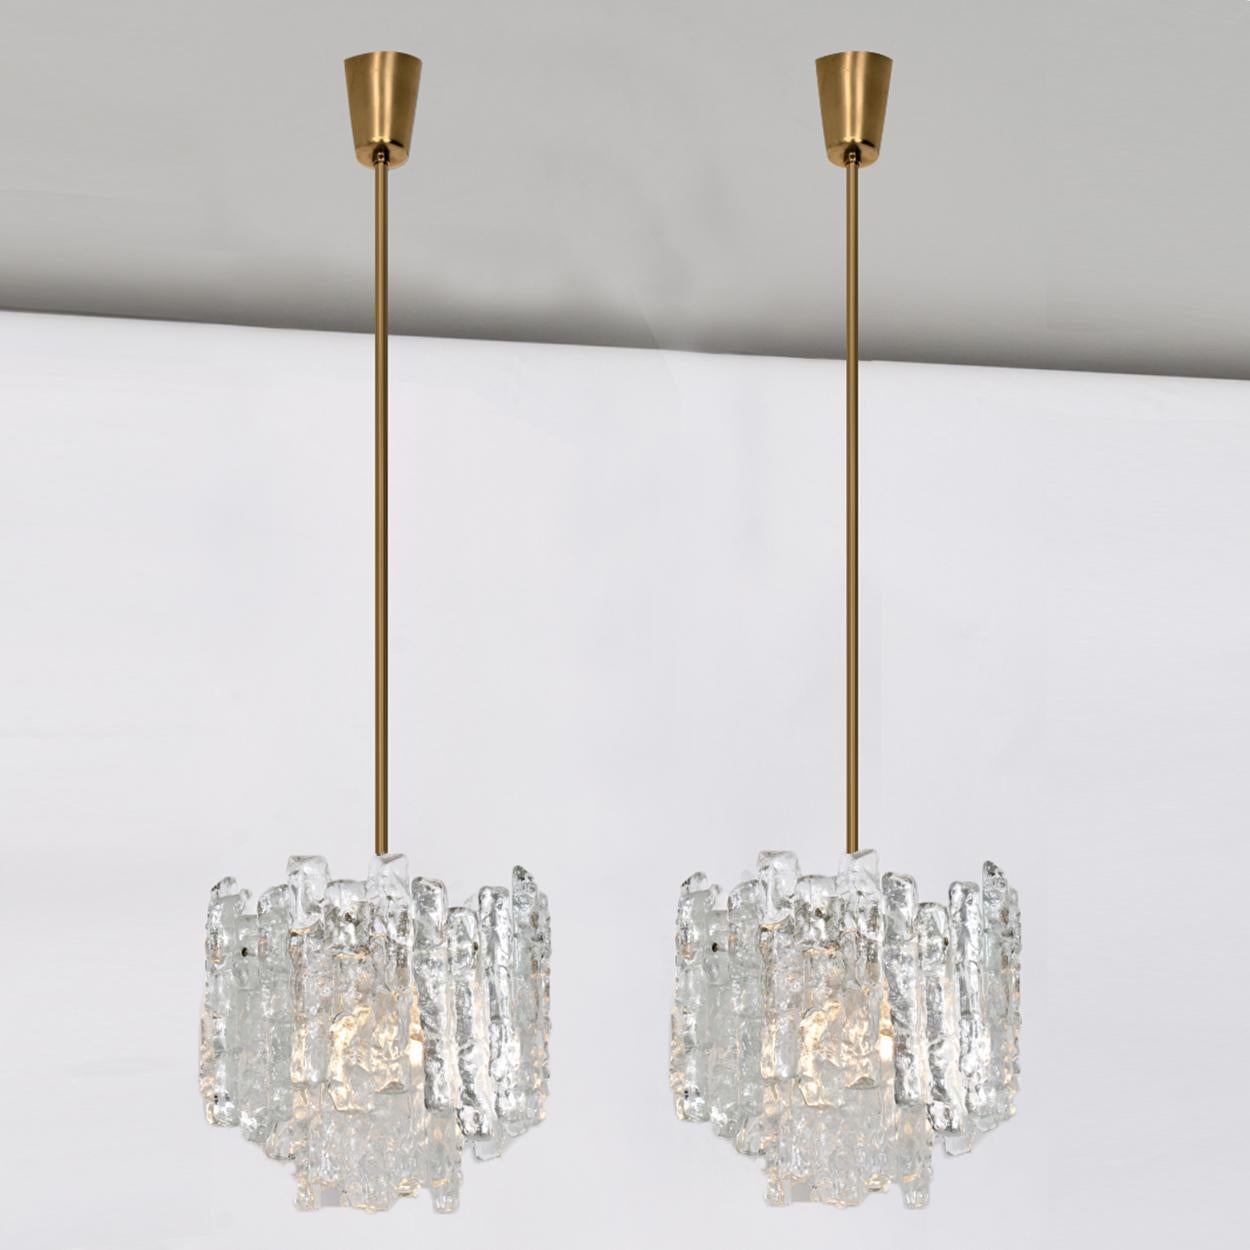 Pair of high-end and elegant modern chandeliers, manufactured by Kalmar, Austria in the 1970s. Lovely design and heavy quality. Each chandelier has six sockets and two layers of extremely stylish textured solid ice glass sheets (12 pieces) dangling